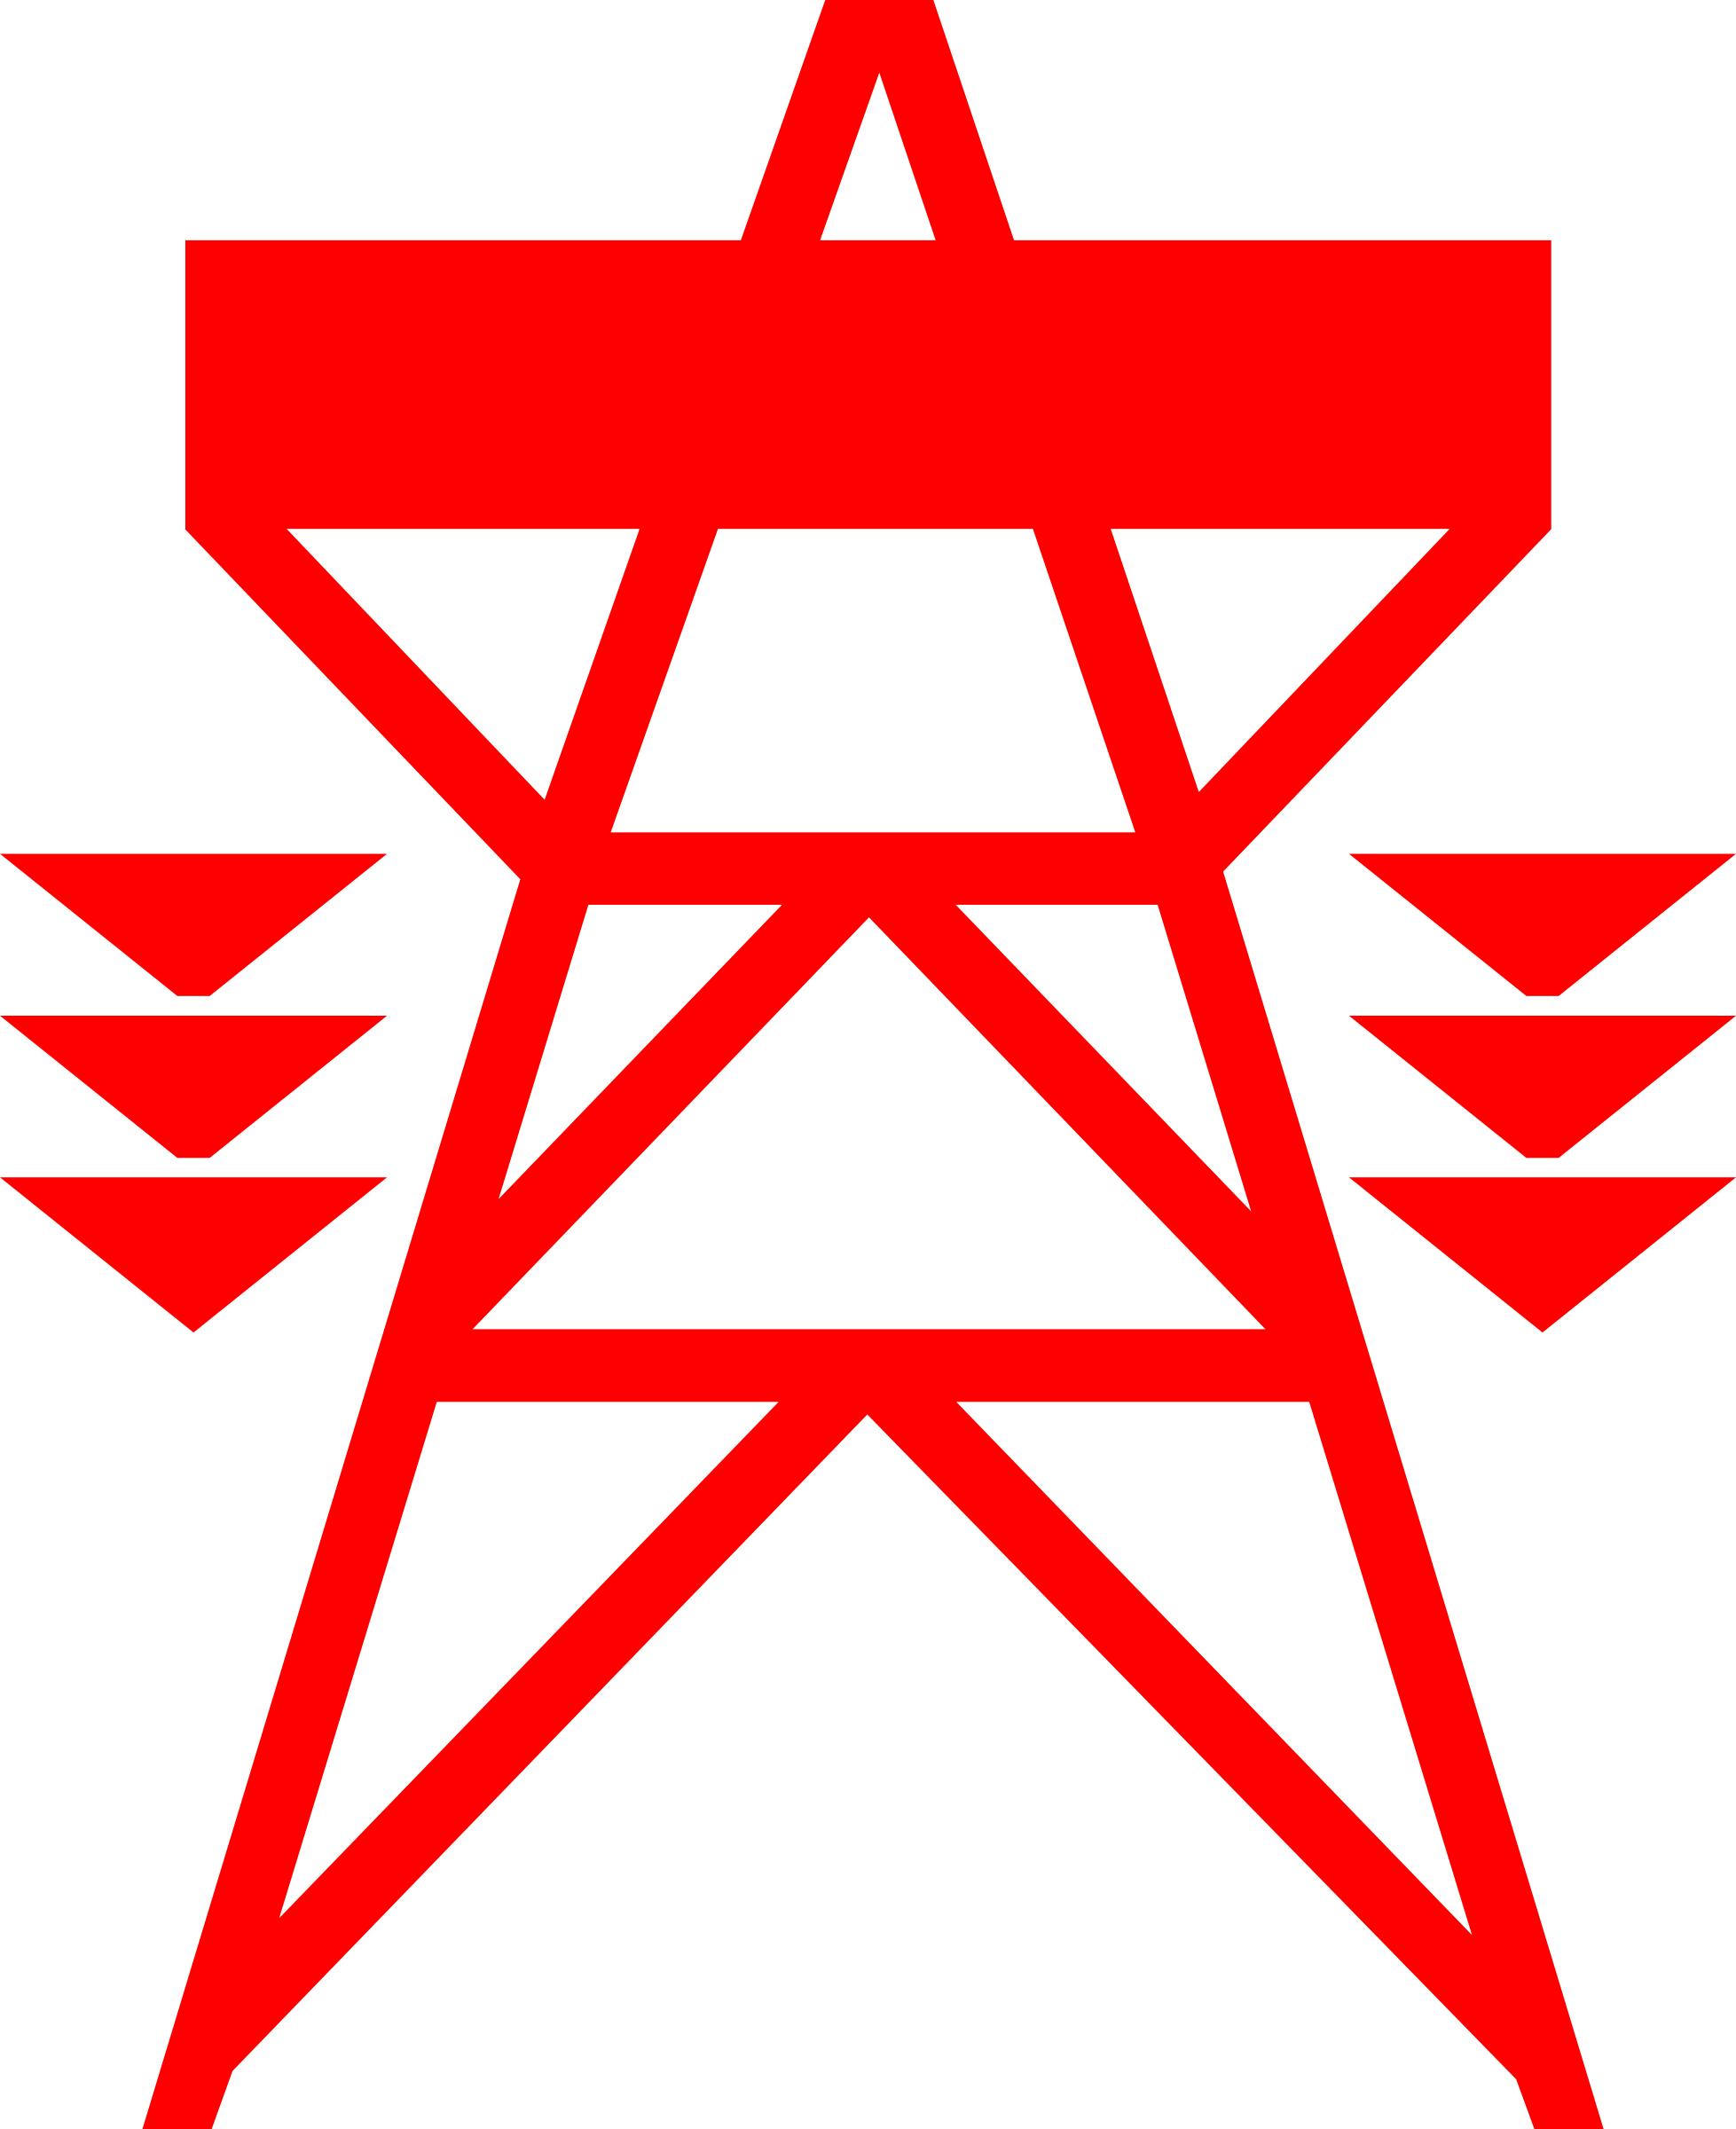 Transmission tower 2 png